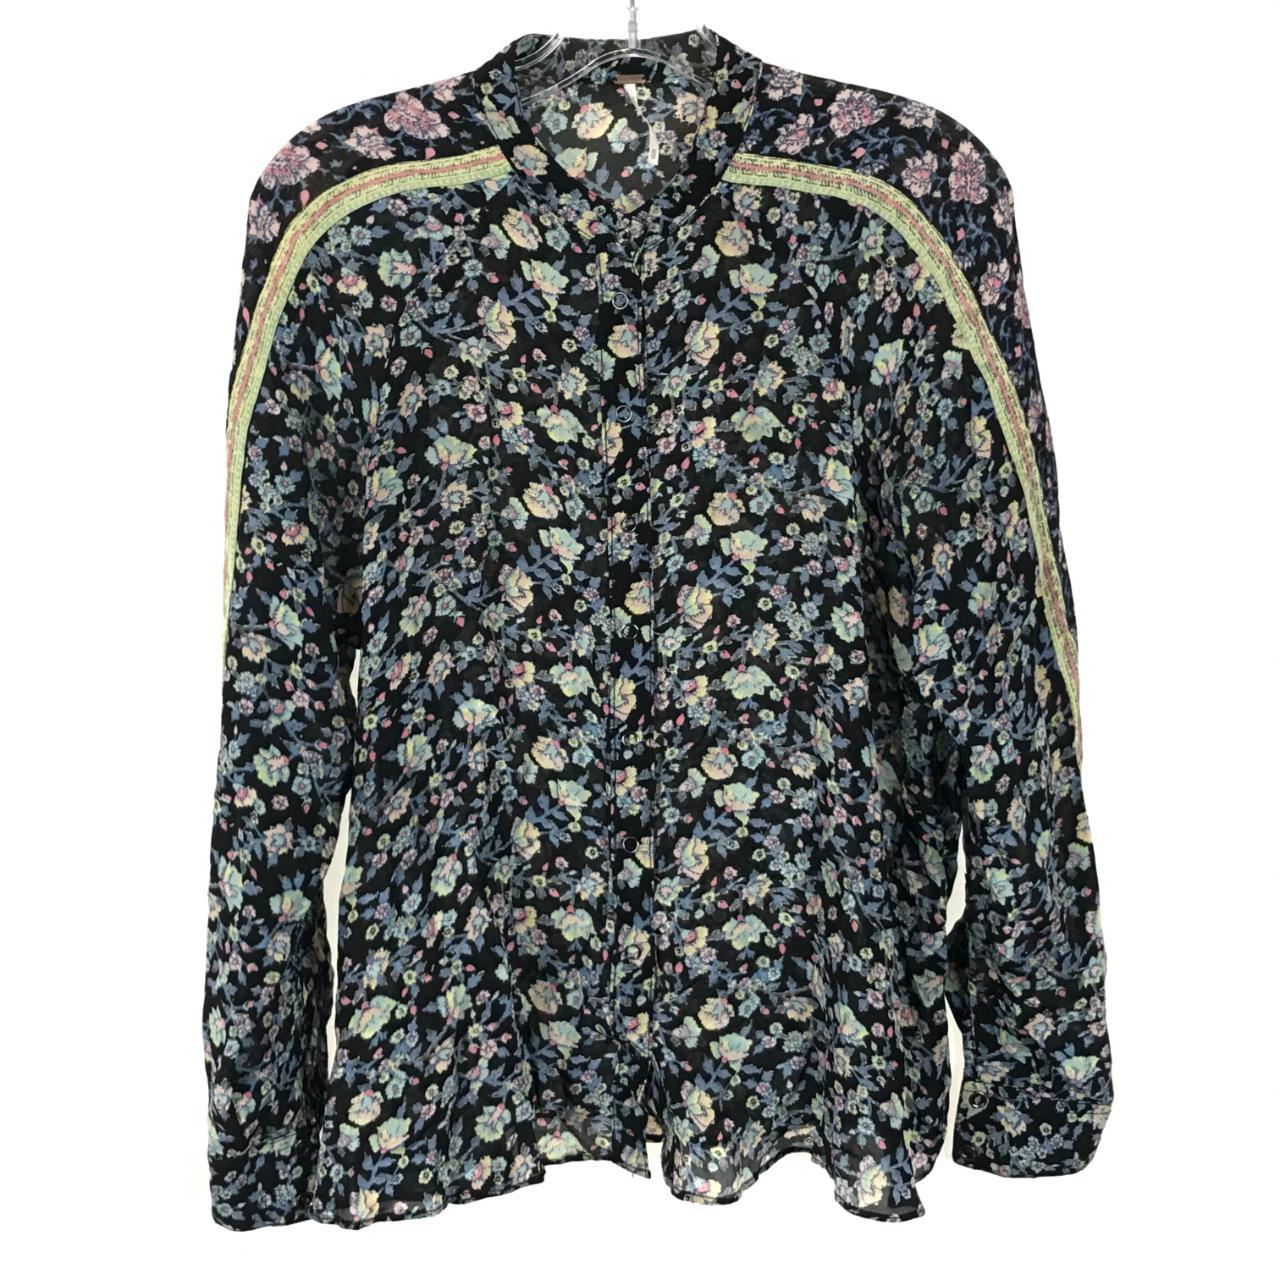 Product Image 1 - Skyway Drive In Blouse
Anthropologie -